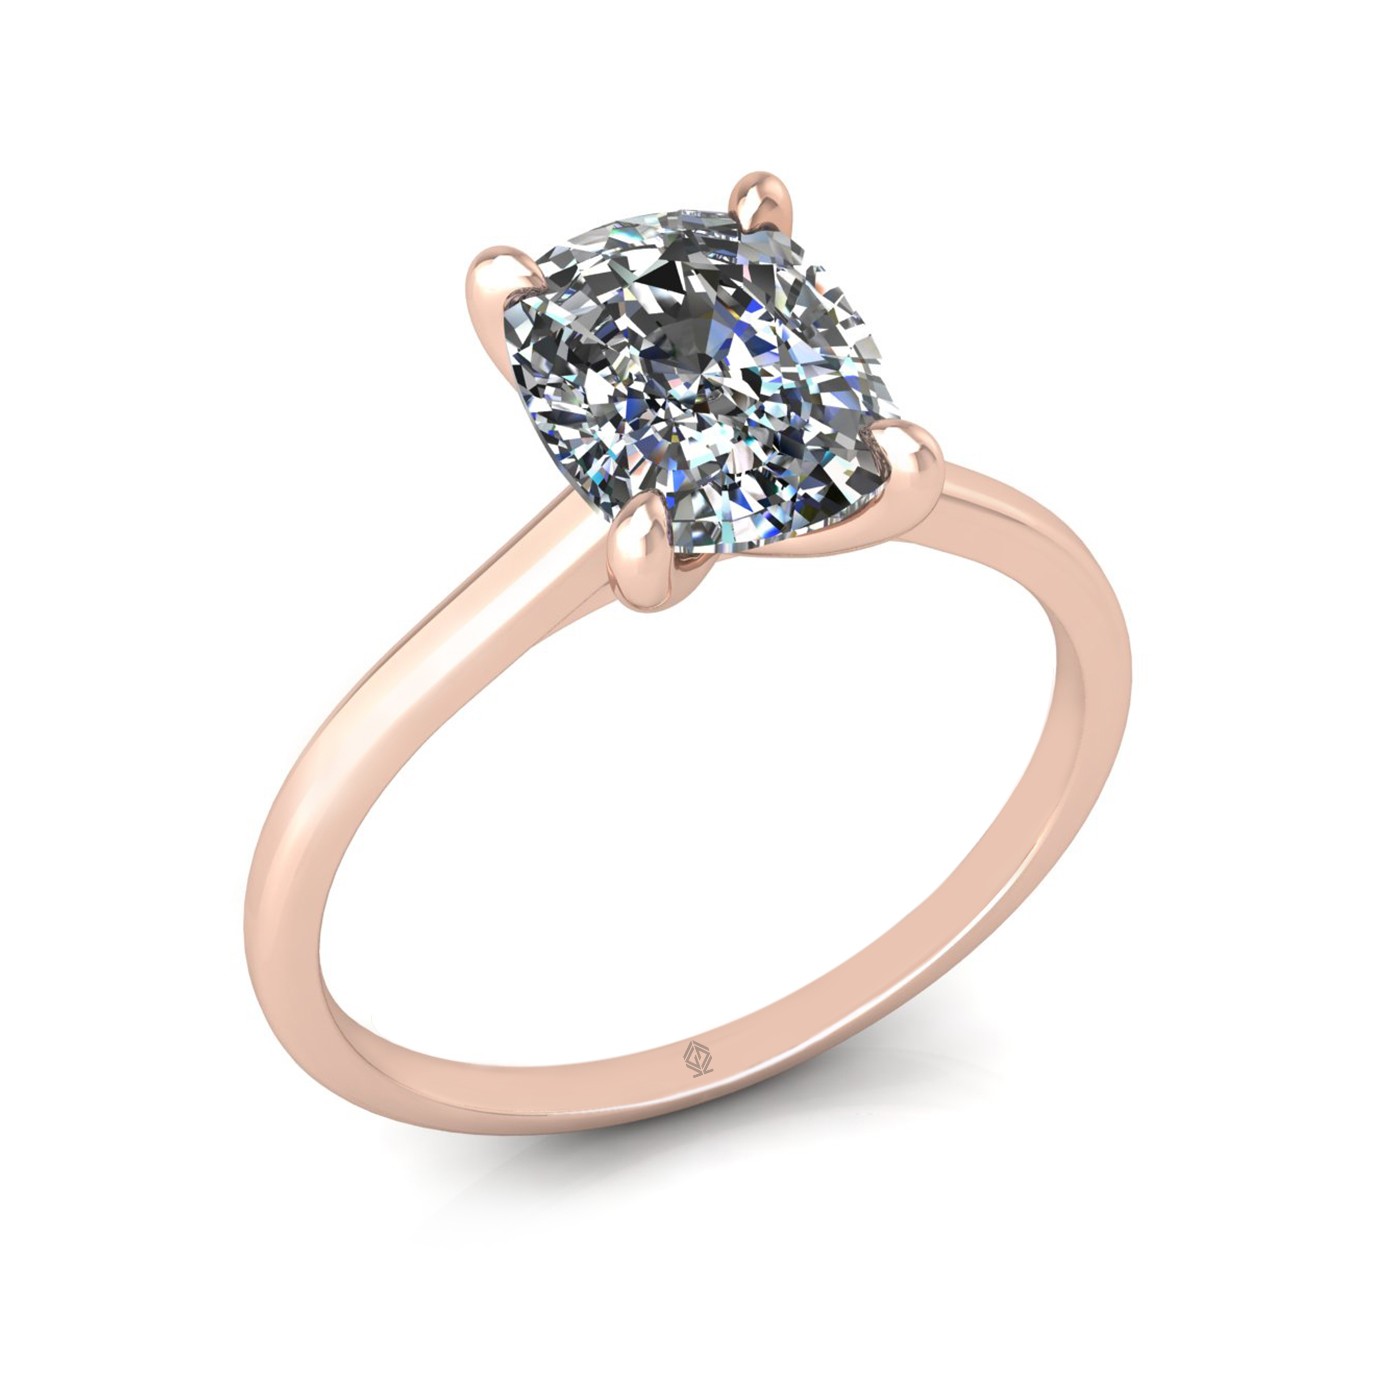 18k rose gold  2.50 ct 4 prongs solitaire elongated cushion cut diamond engagement ring with whisper thin band